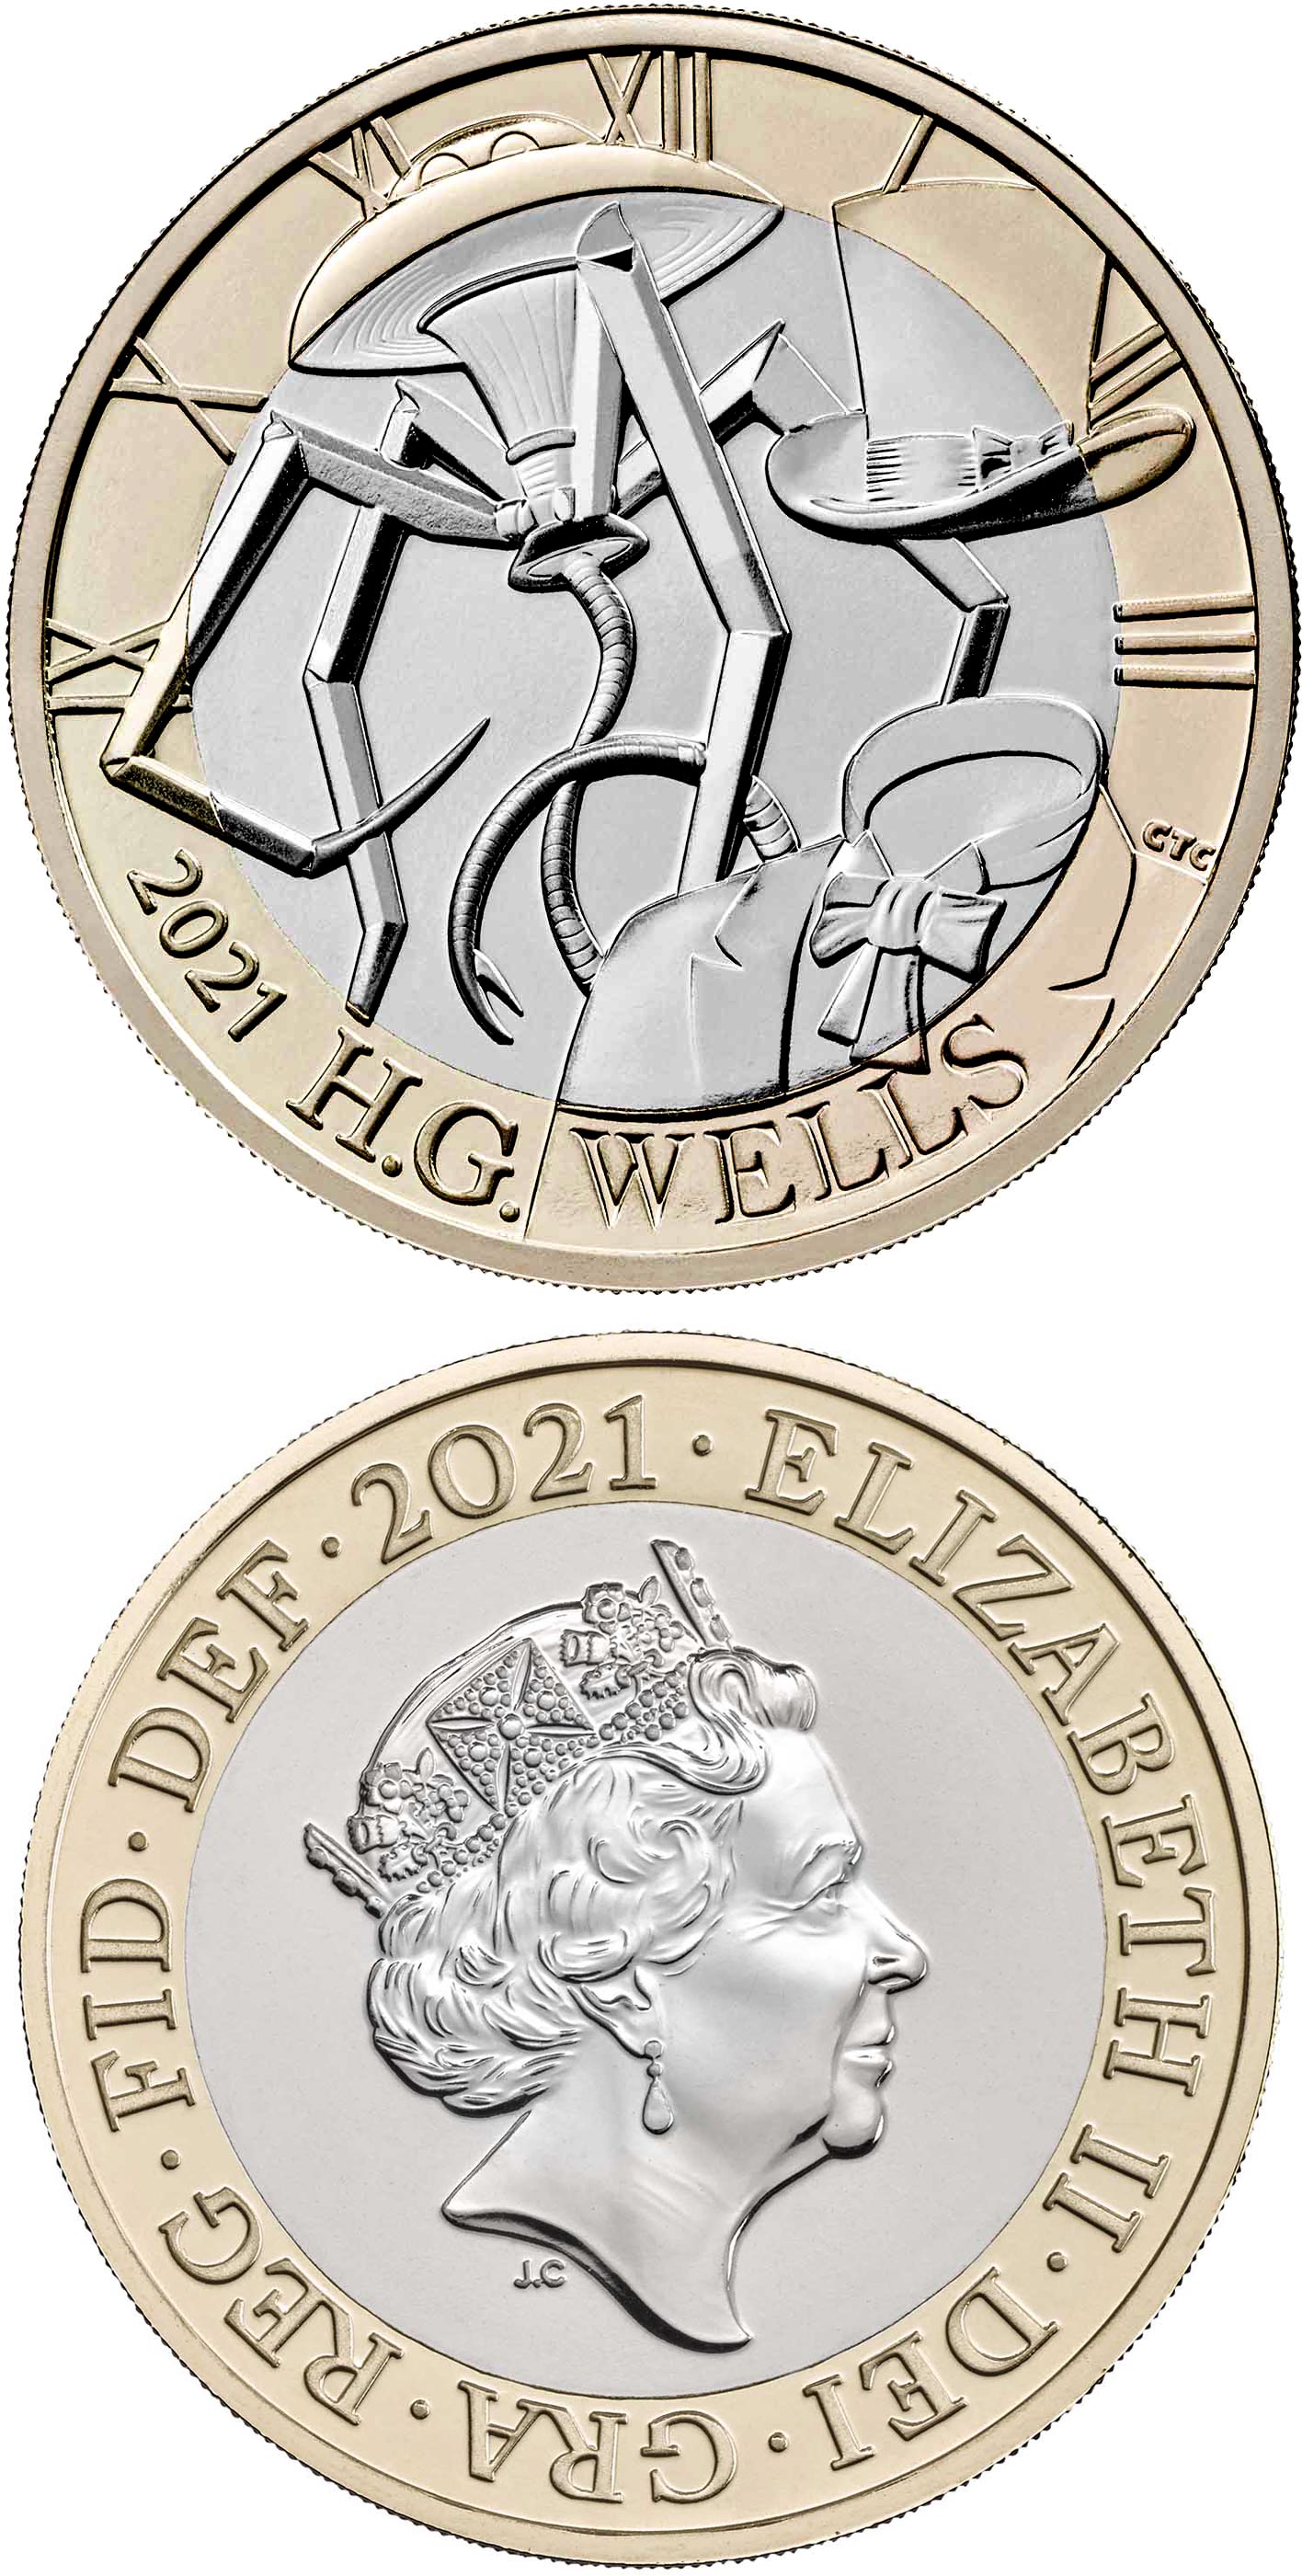 Image of 2 pounds coin - Celebrating the life and work of H. G. Wells | United Kingdom 2021.  The Bimetal: CuNi, nordic gold coin is of Proof, BU, UNC quality.